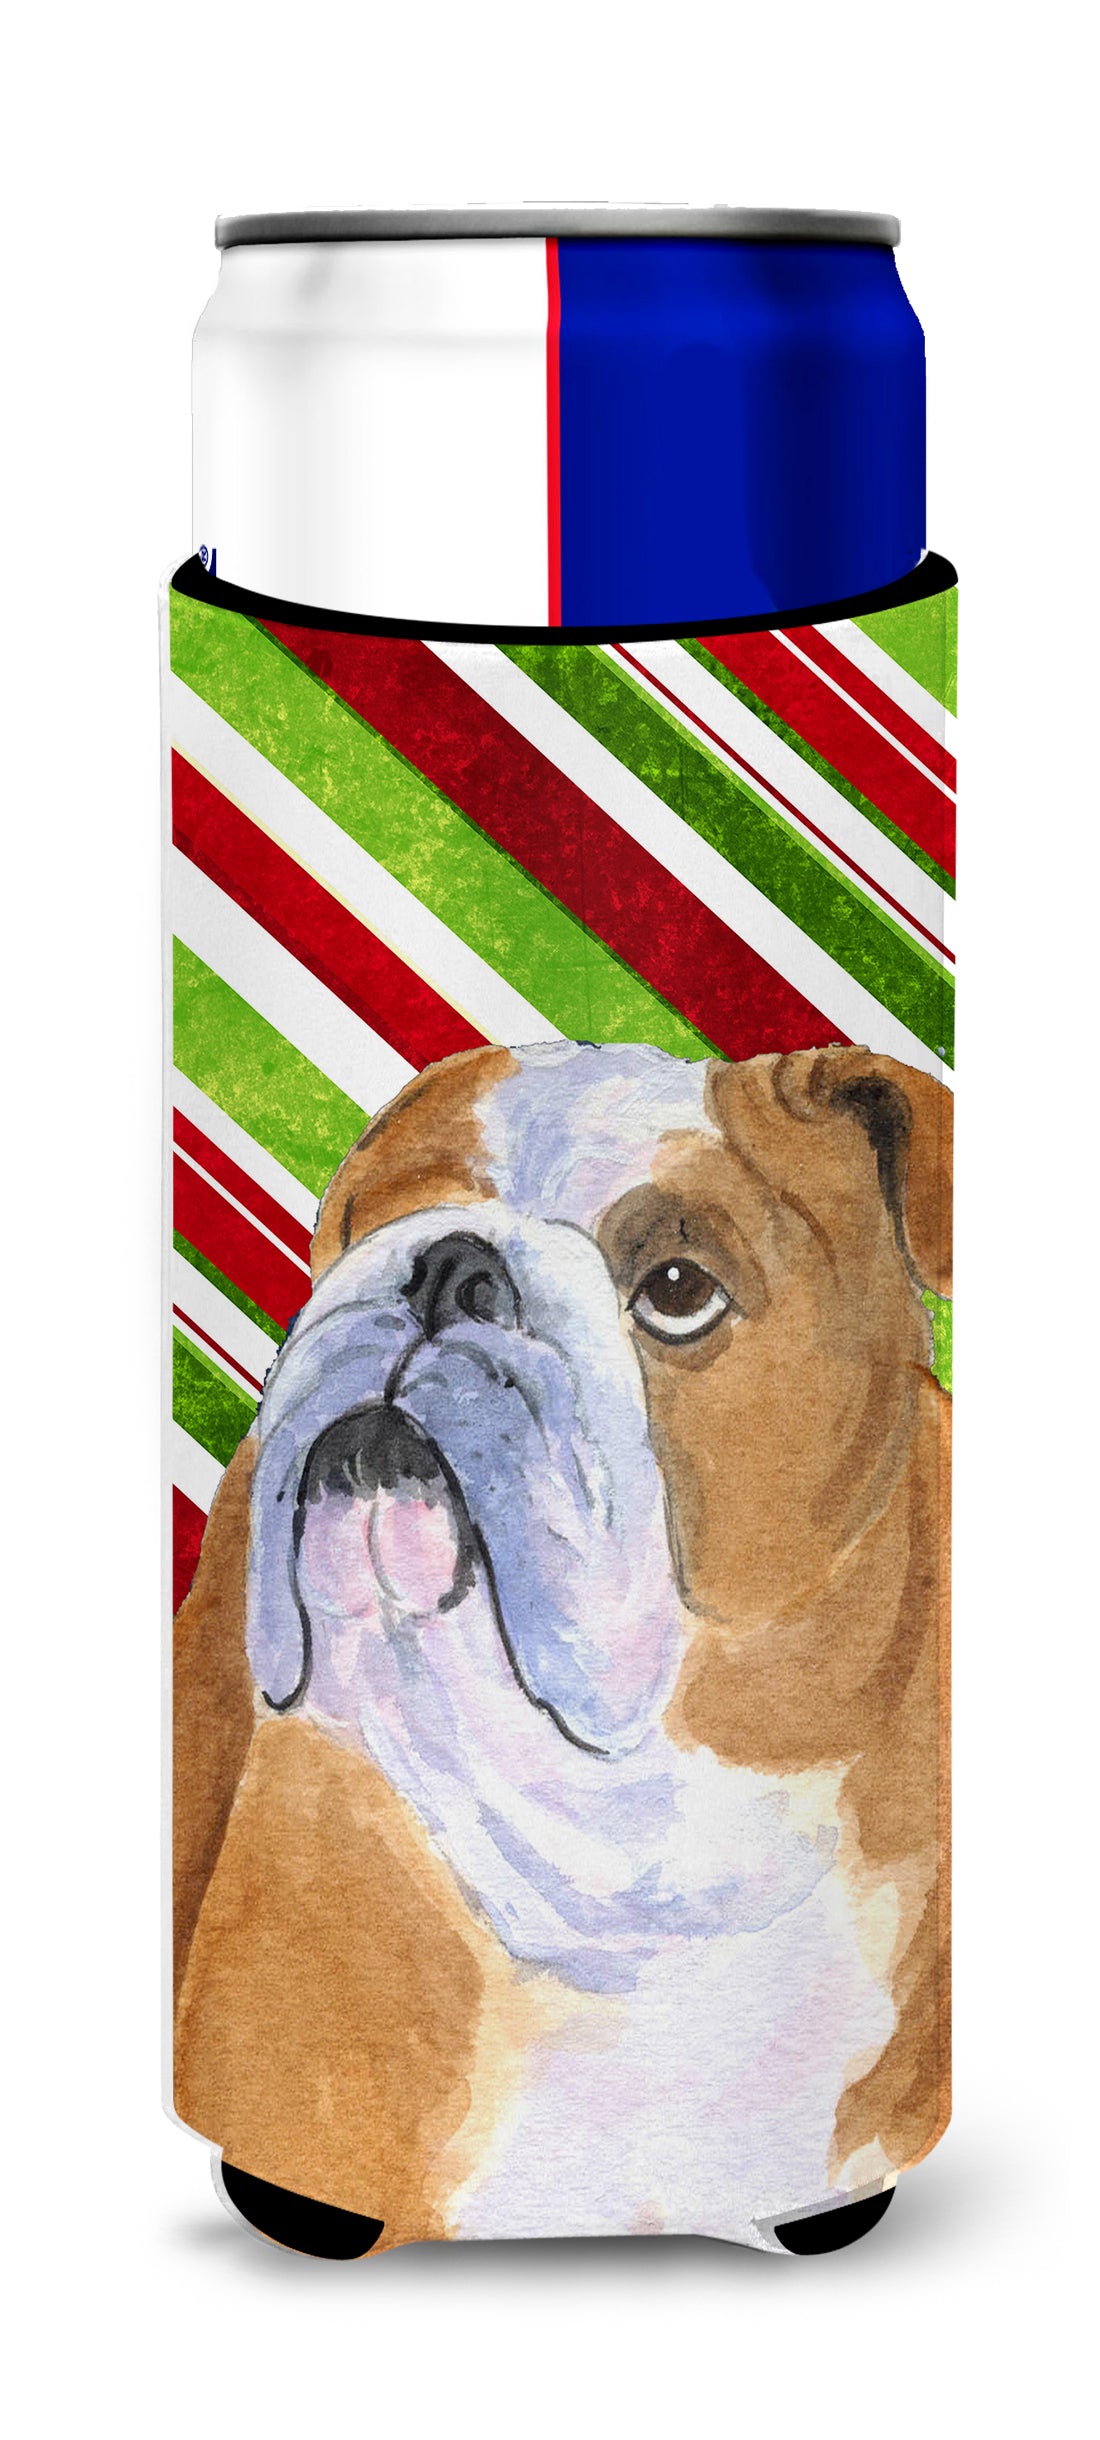 Bulldog English Candy Cane Holiday Christmas Ultra Beverage Insulators for slim cans SS4560MUK.